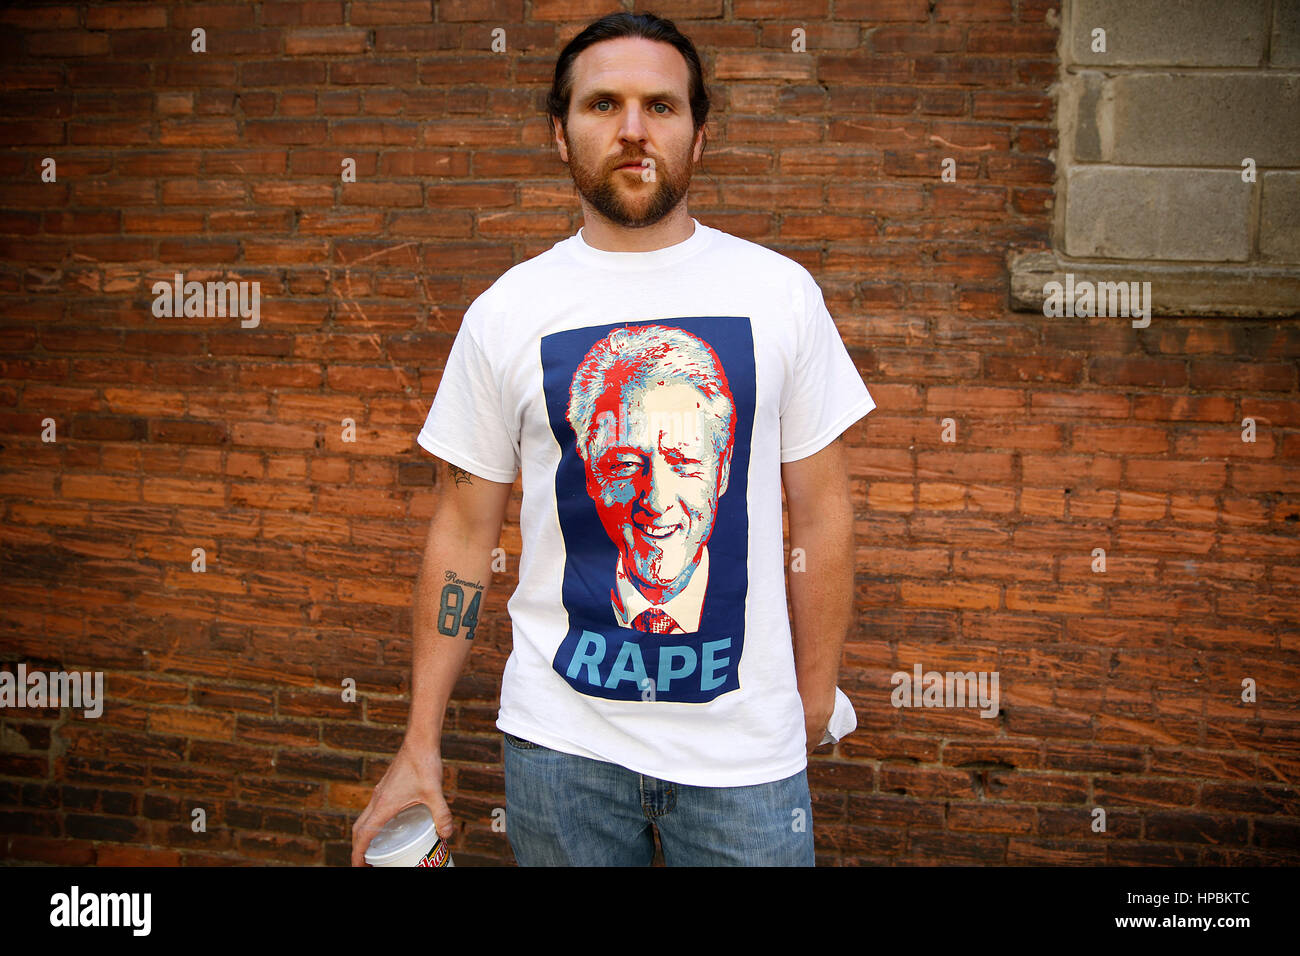 A Donald Trump supporter wearing an anti-Clinton shirt poses for a portrait outside of the Republican National Convention on July 21, 2016. Cleveland, Stock Photo